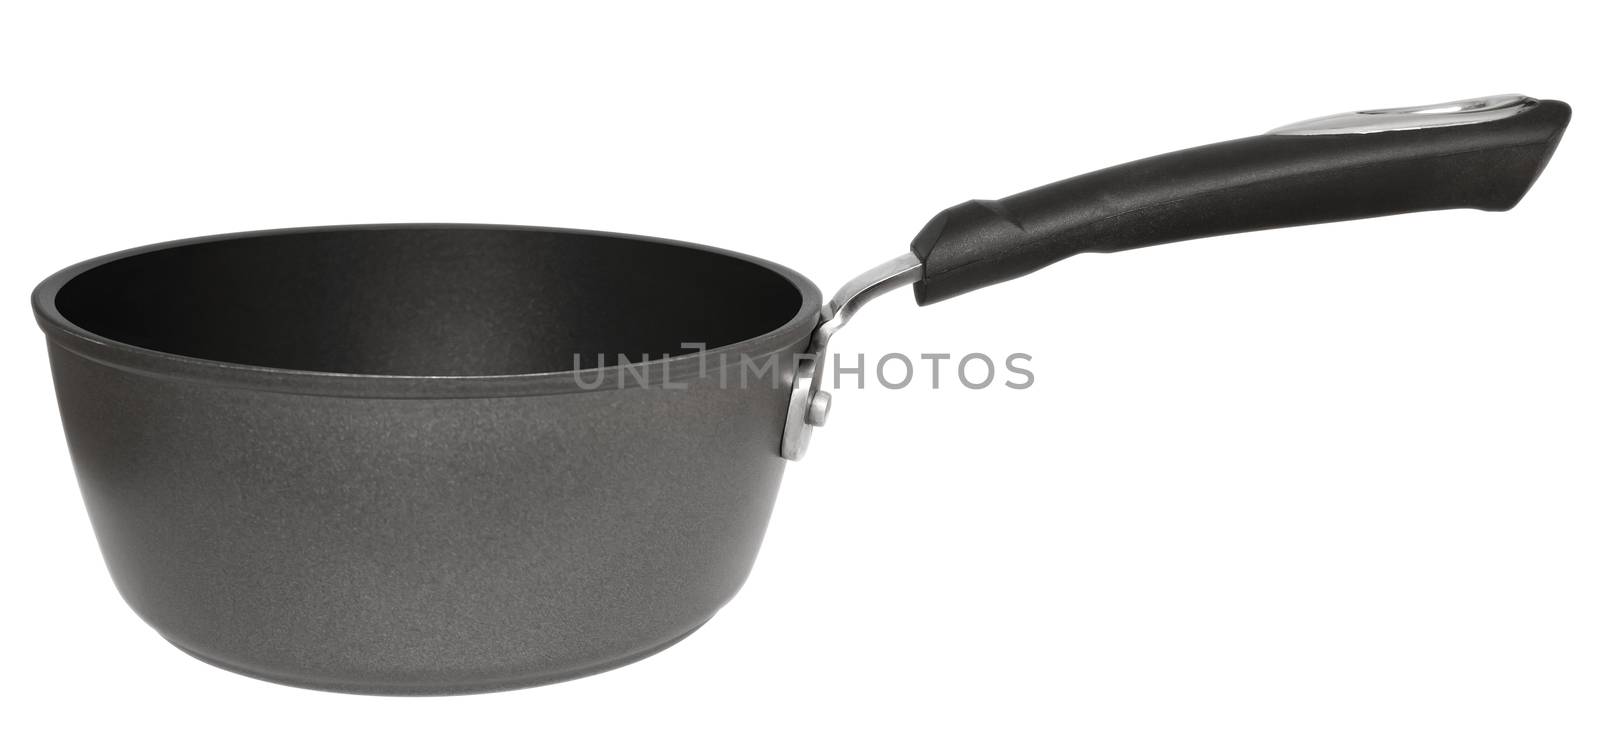 Griddle isolated on the white background. Clipping path included.